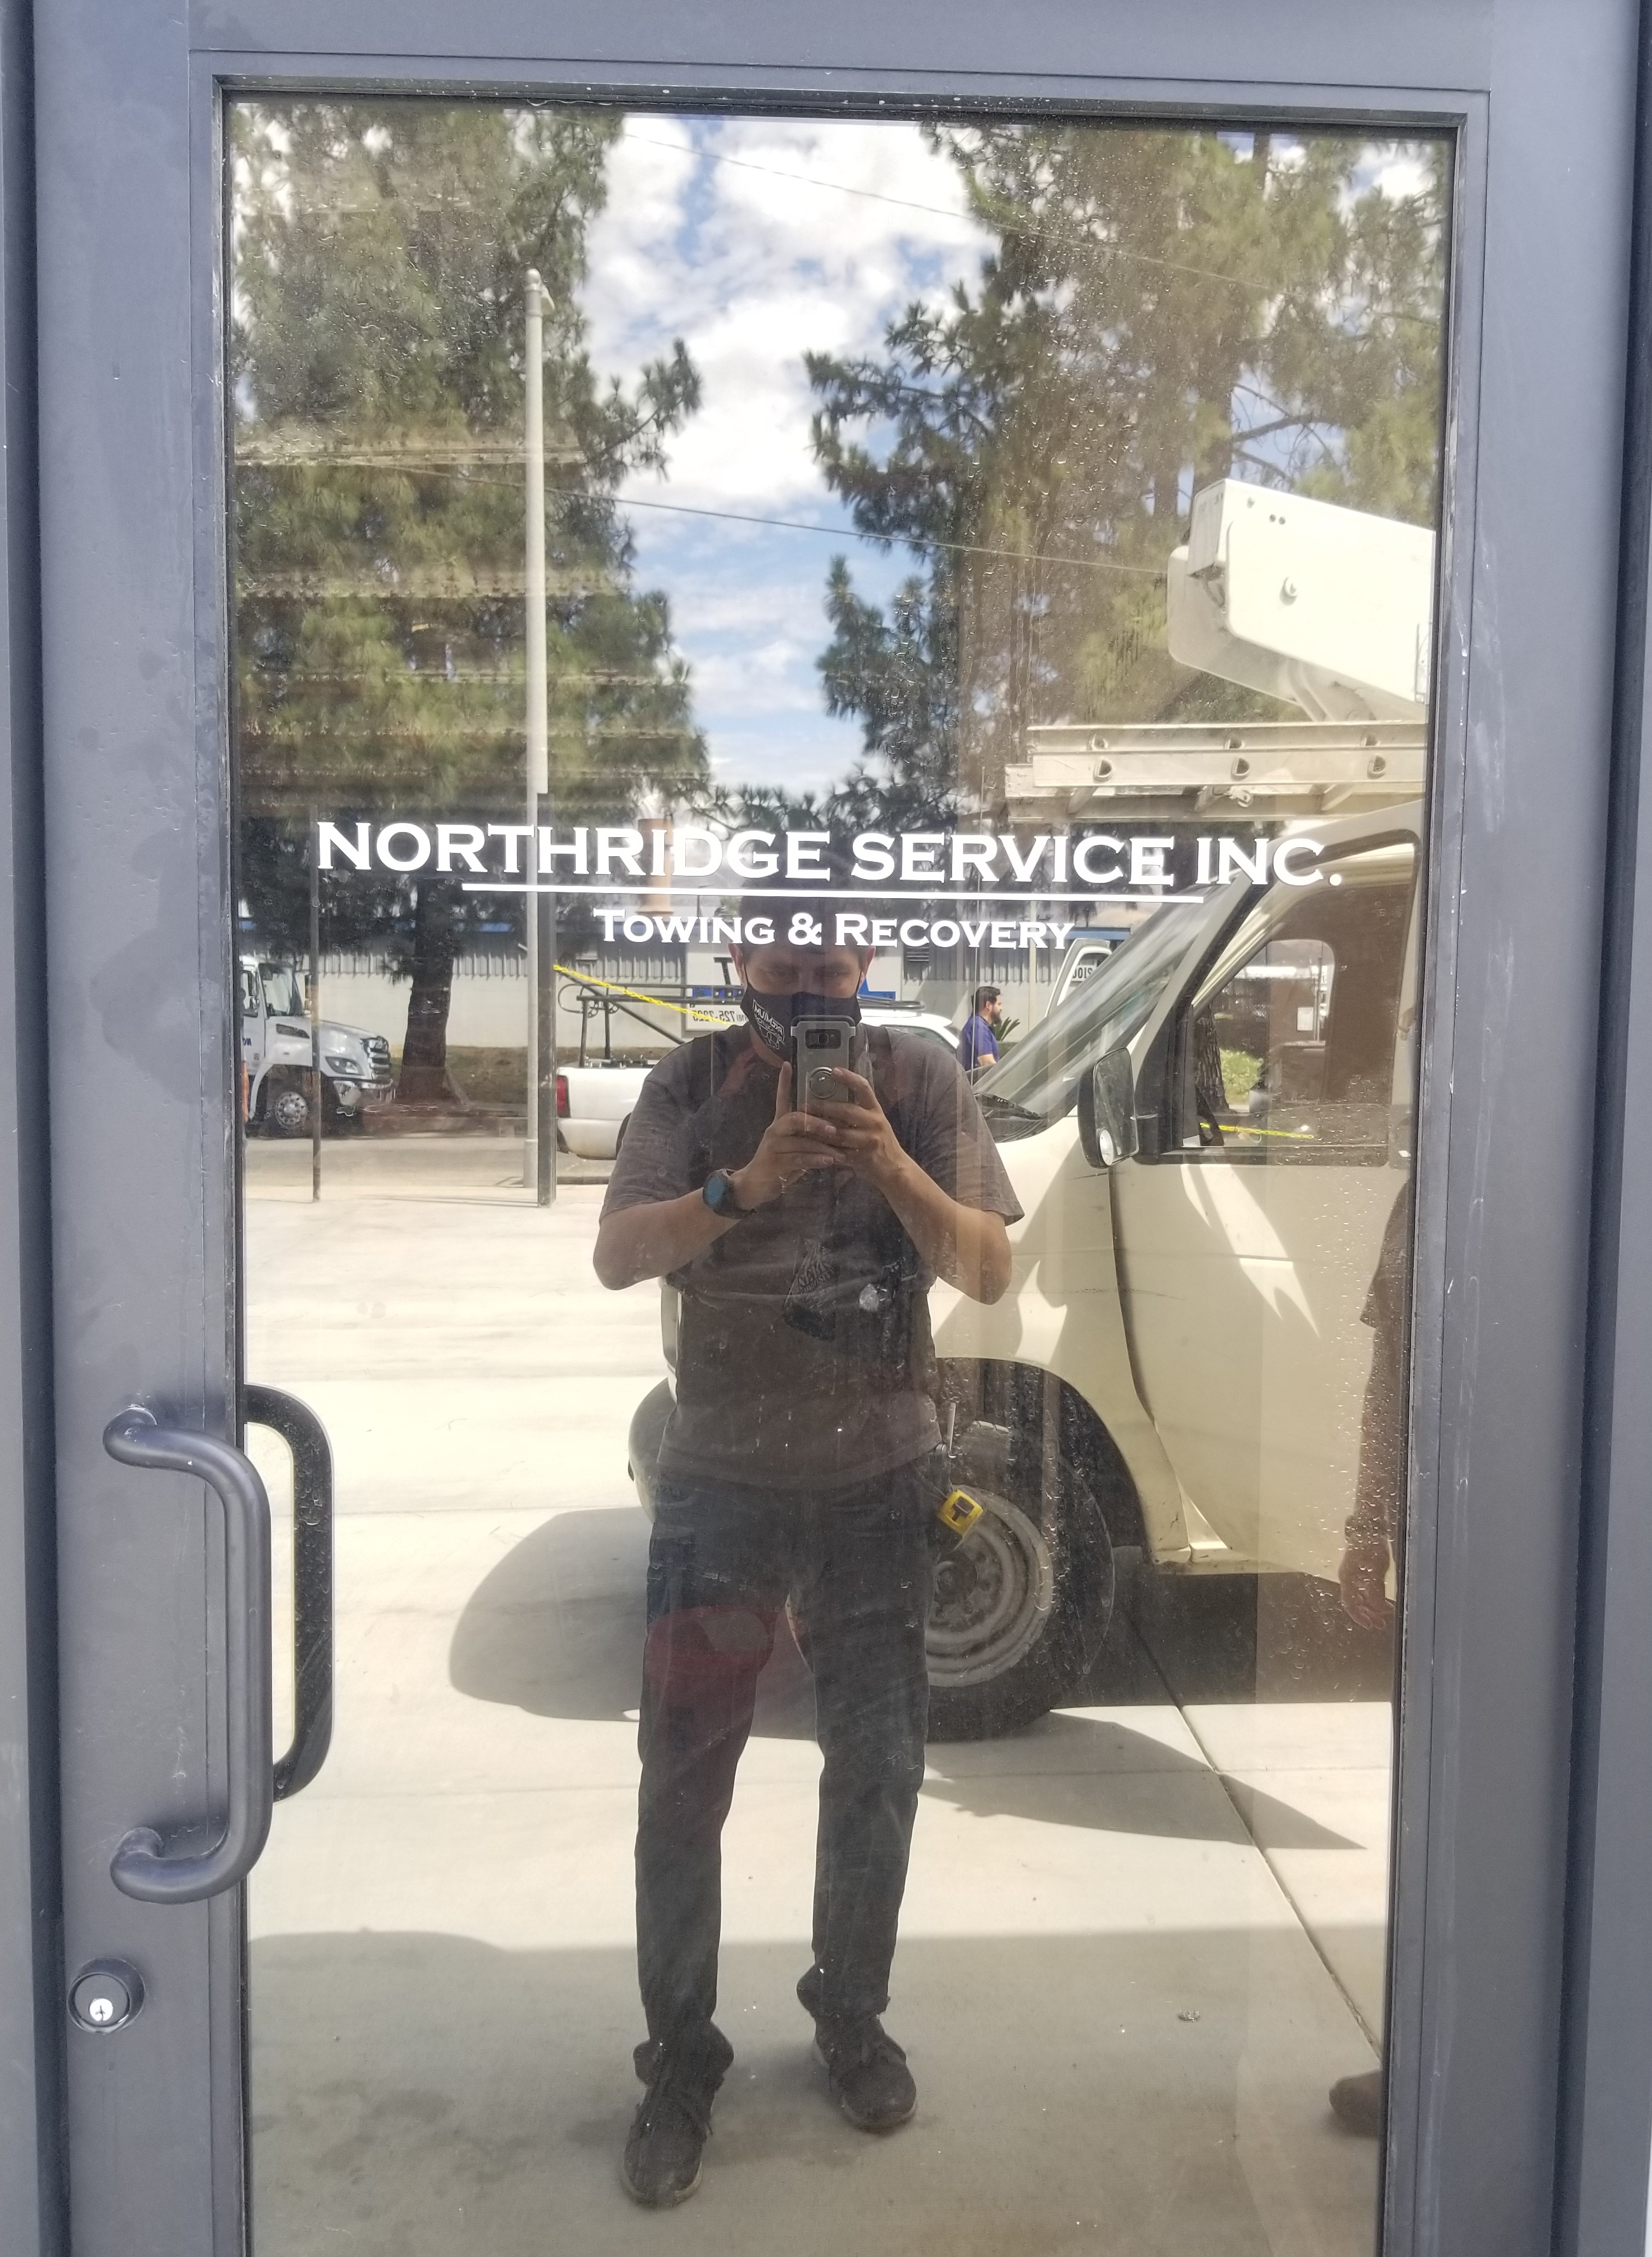 Our work for Northridge Auto Service continues. This time it is indoor office signage, specifically a wall graphics business sign package.